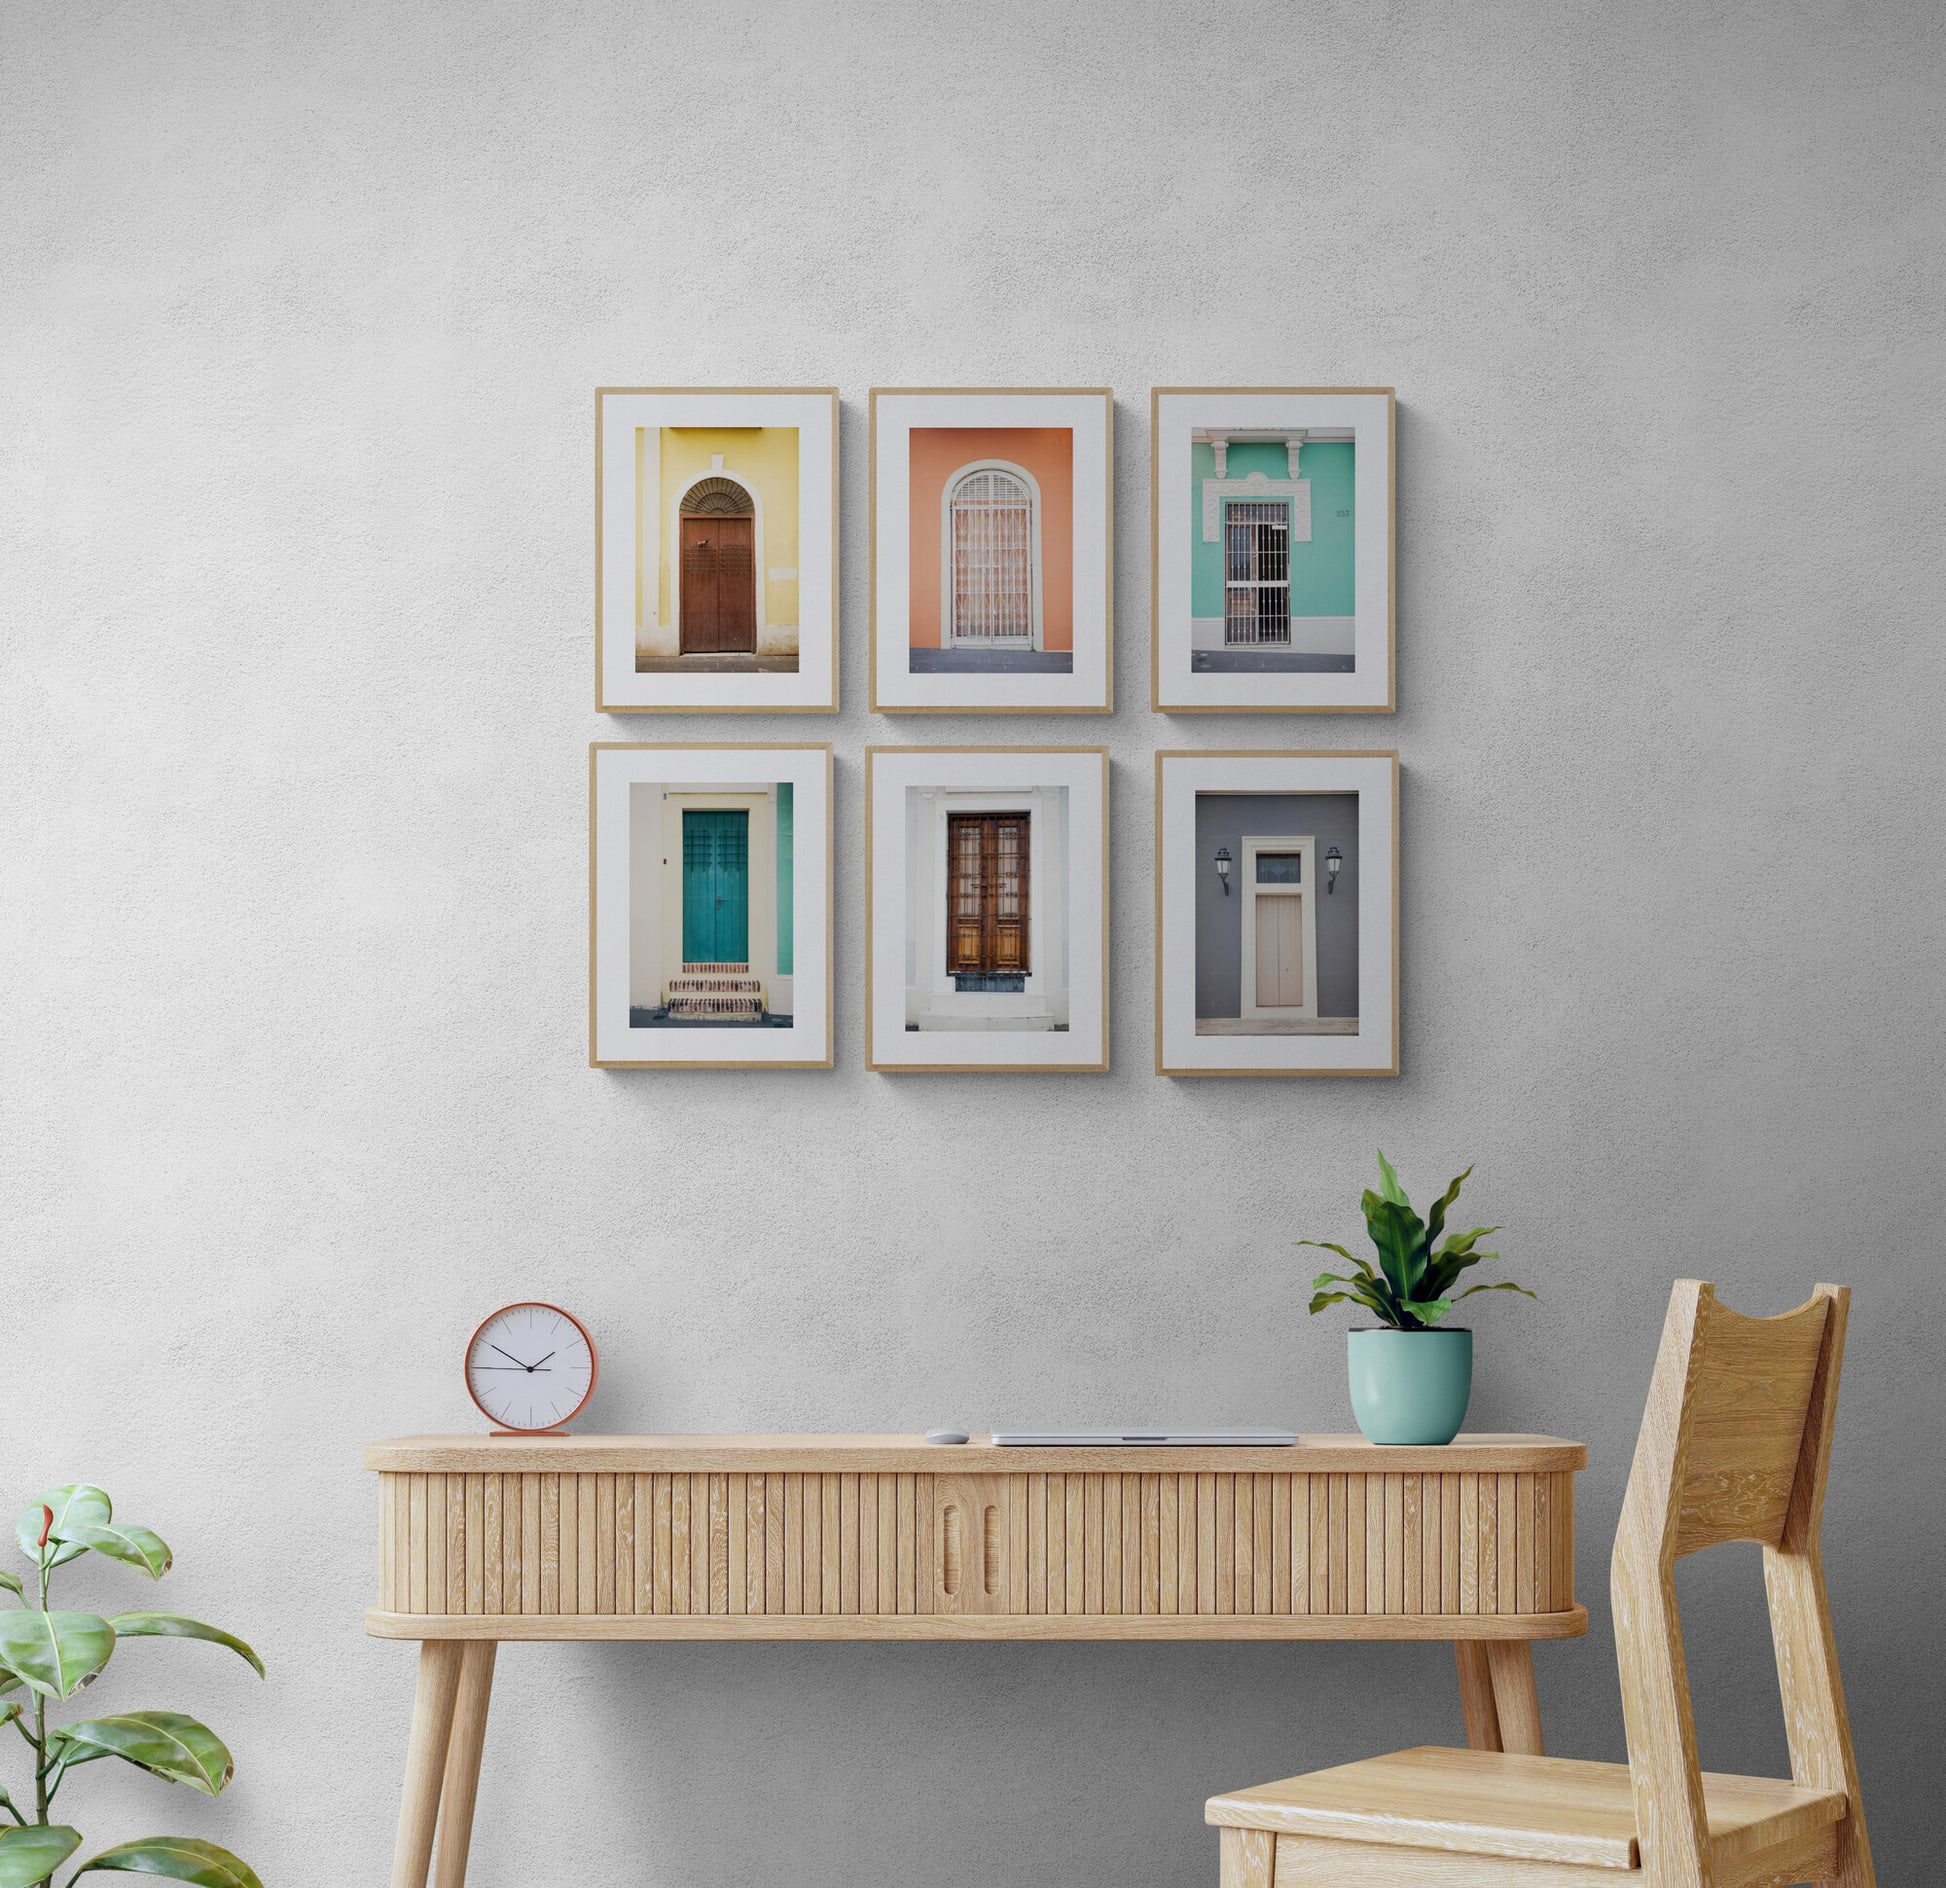 Set of 6 photographs of puerto rico doors as wall art in an office